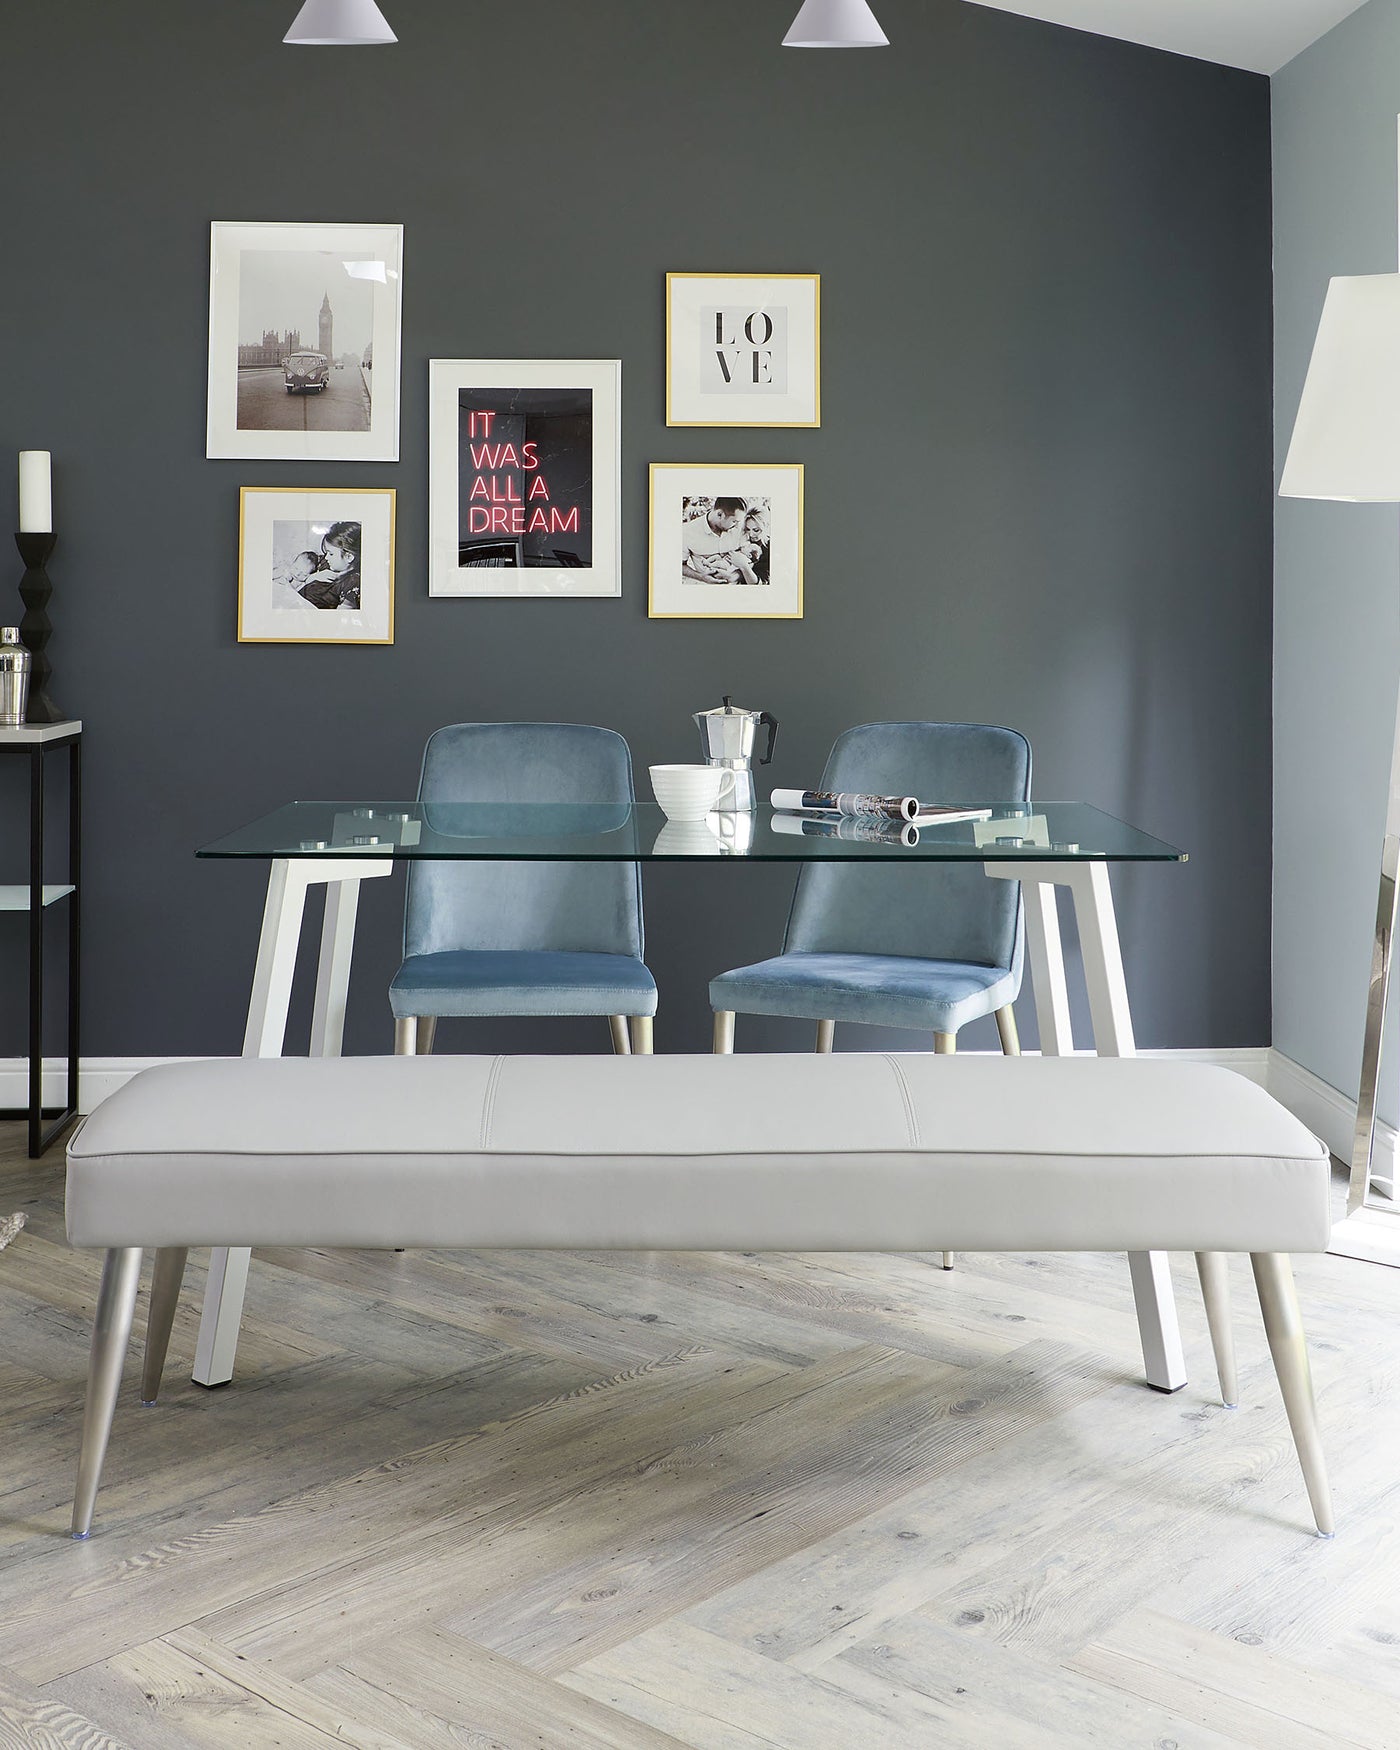 Modern dining room with a sleek glass-top table and four translucent blue dining chairs. A light grey upholstered bench with clean lines and subtle stitching details provides additional seating, all resting on a herringbone patterned wooden floor.